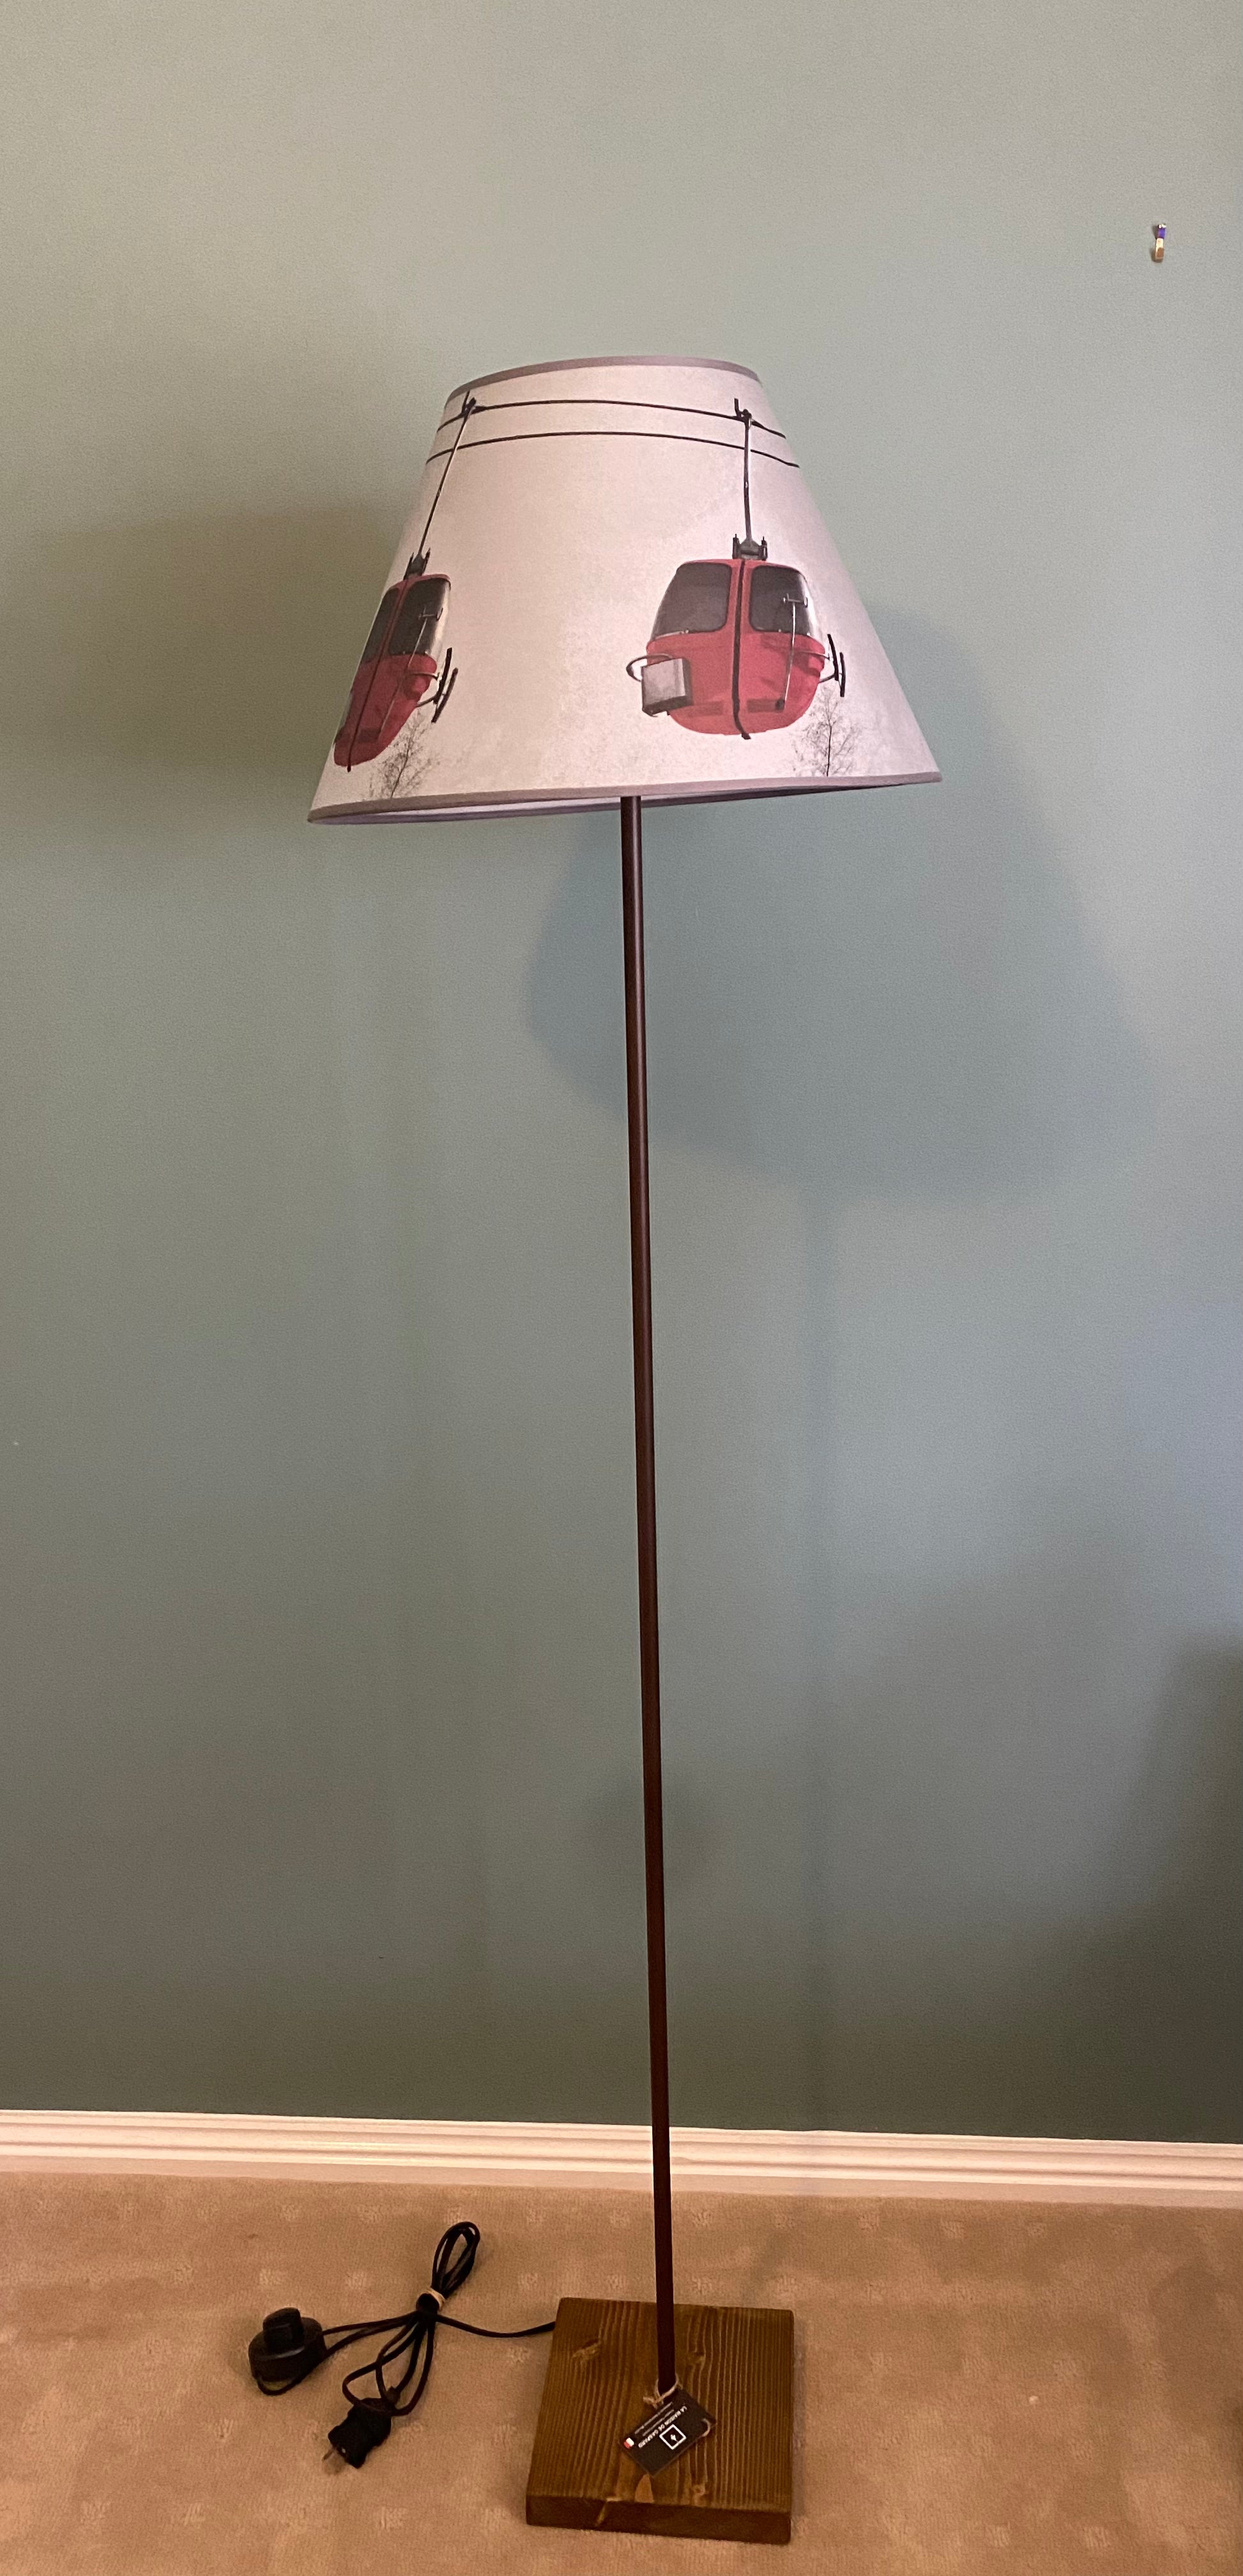 Photo of a floor lamp with a square solid wood base supporting a brown metal rod, topped by a vintage photo printed canvas lamp shade. The colour photo shows 3 red egg gondolas in the air with tree tops and clouds in the background against a grey sky. Lamp sits on beige carpet, in front of a green painted wall.